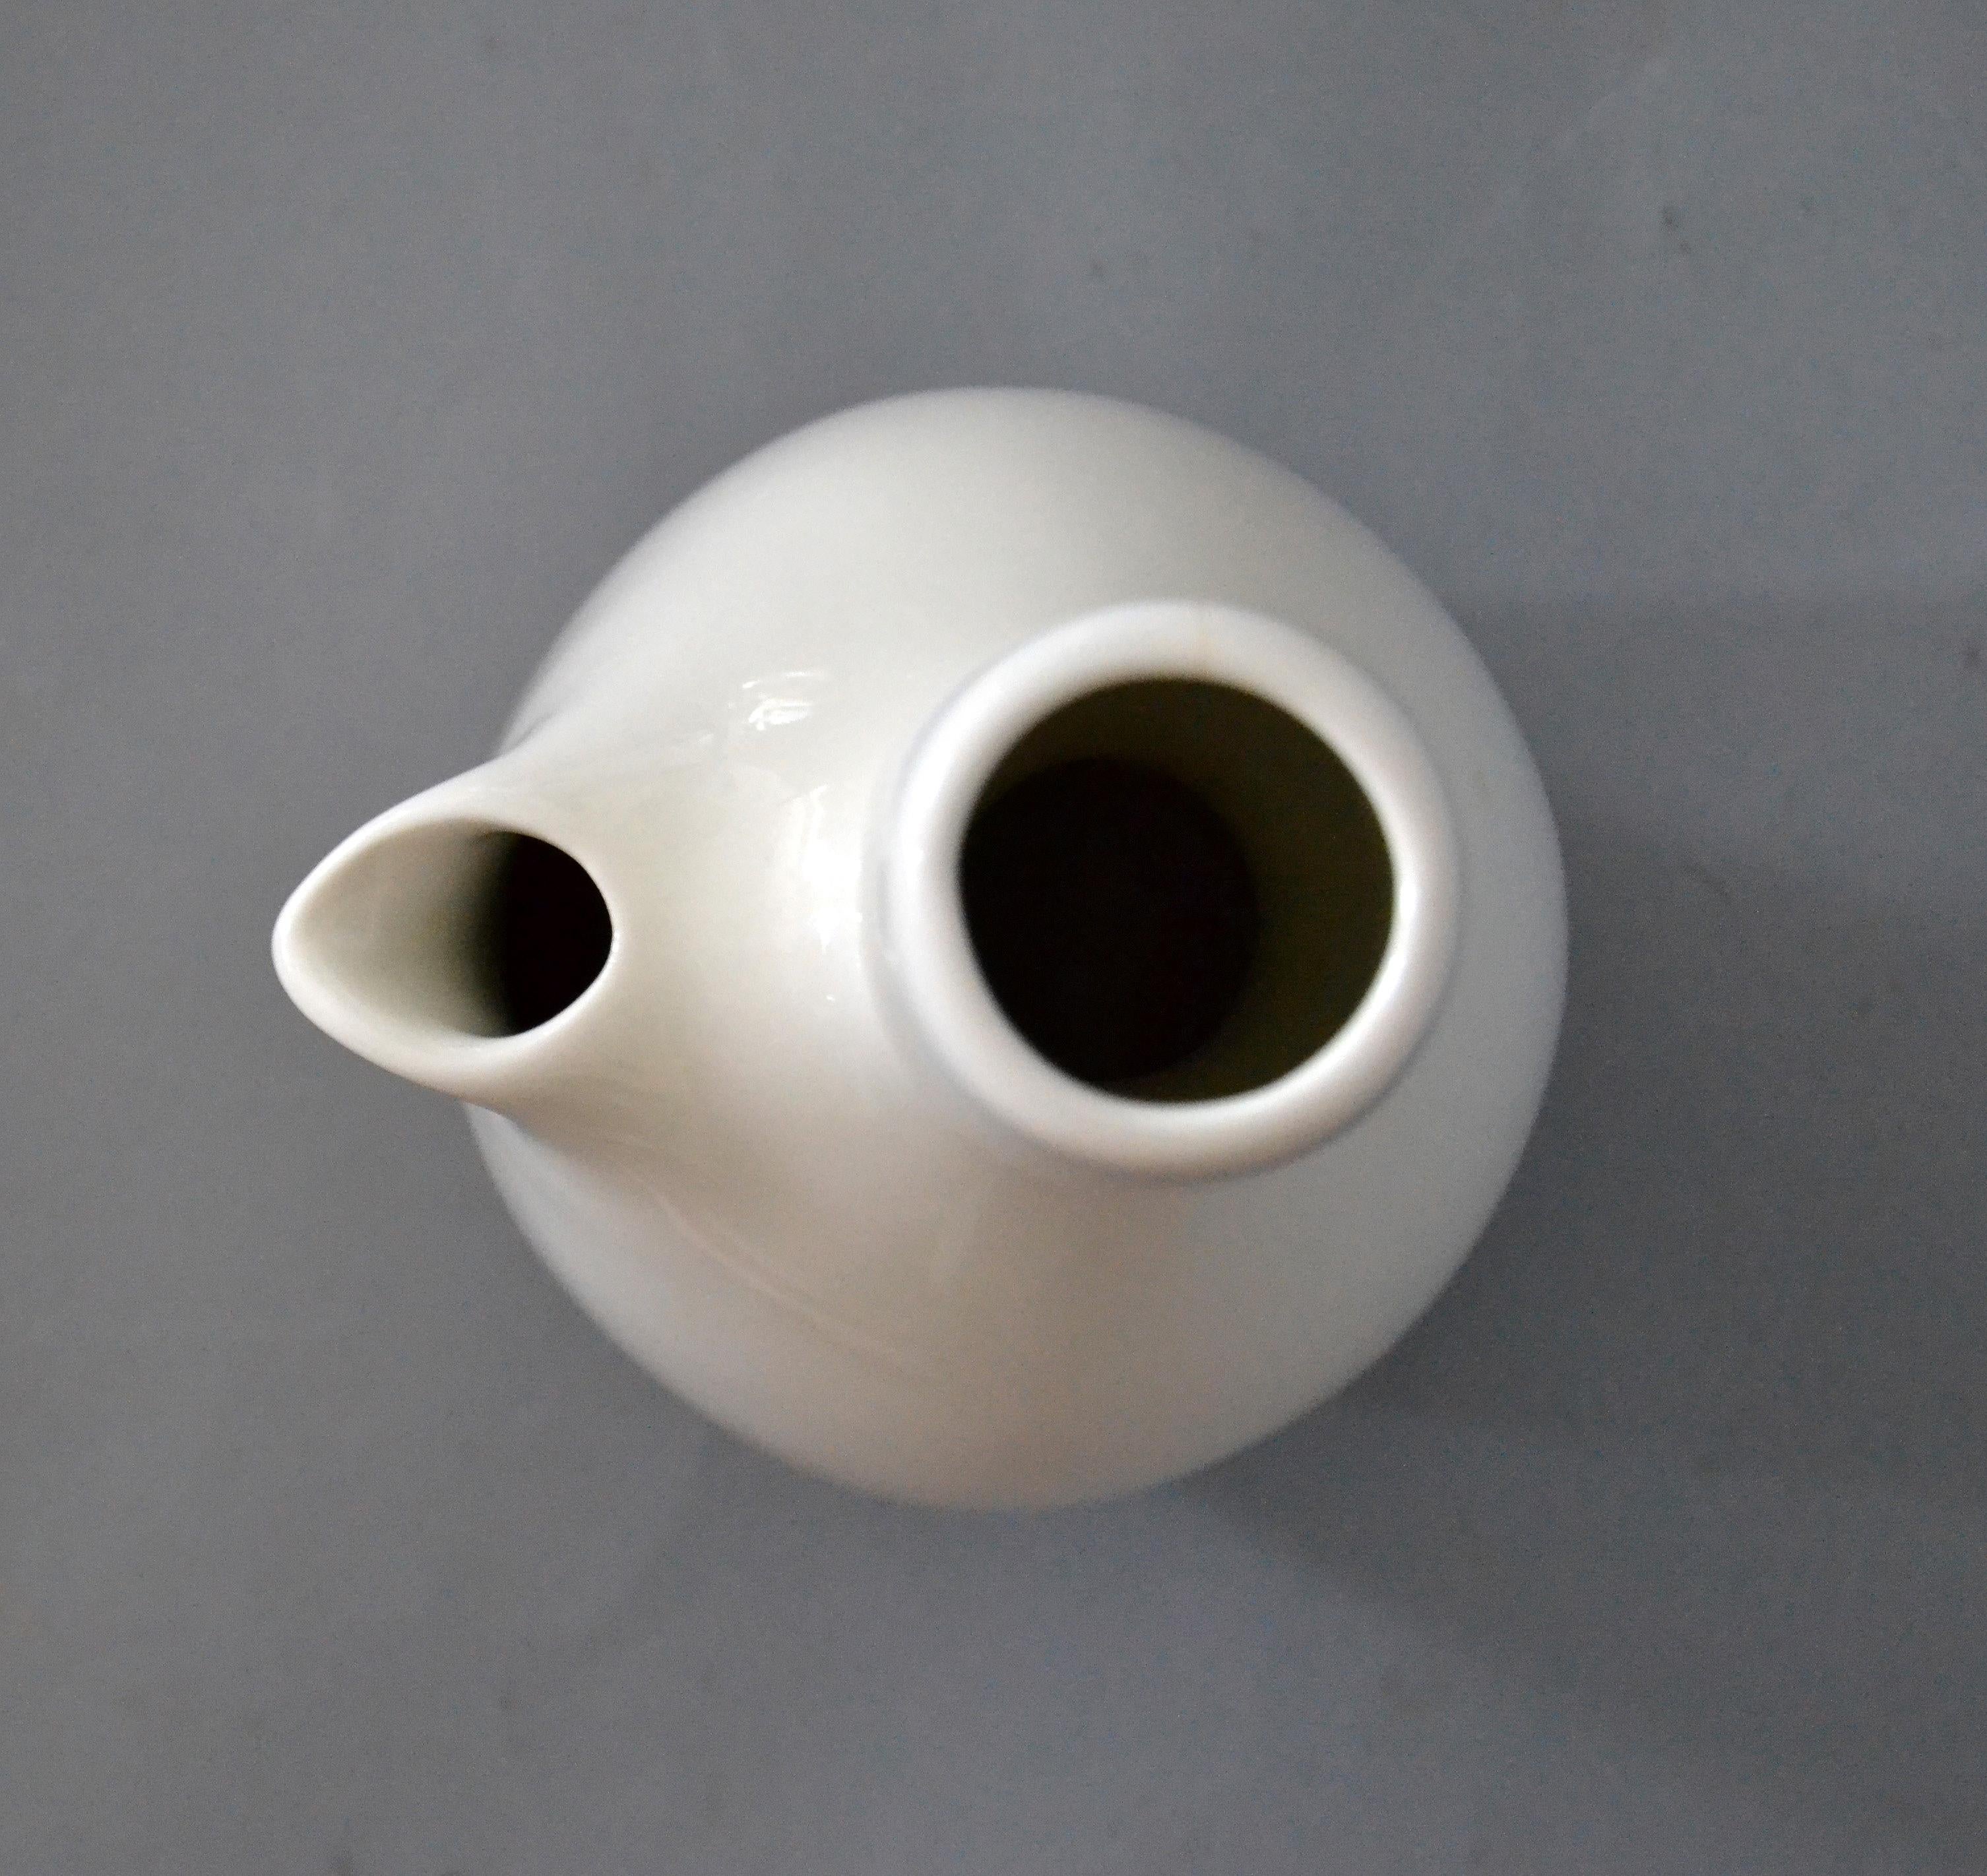 20th Century American Modern Iroquois White Porcelain Carafe Russel Wright for Bauer Pottery